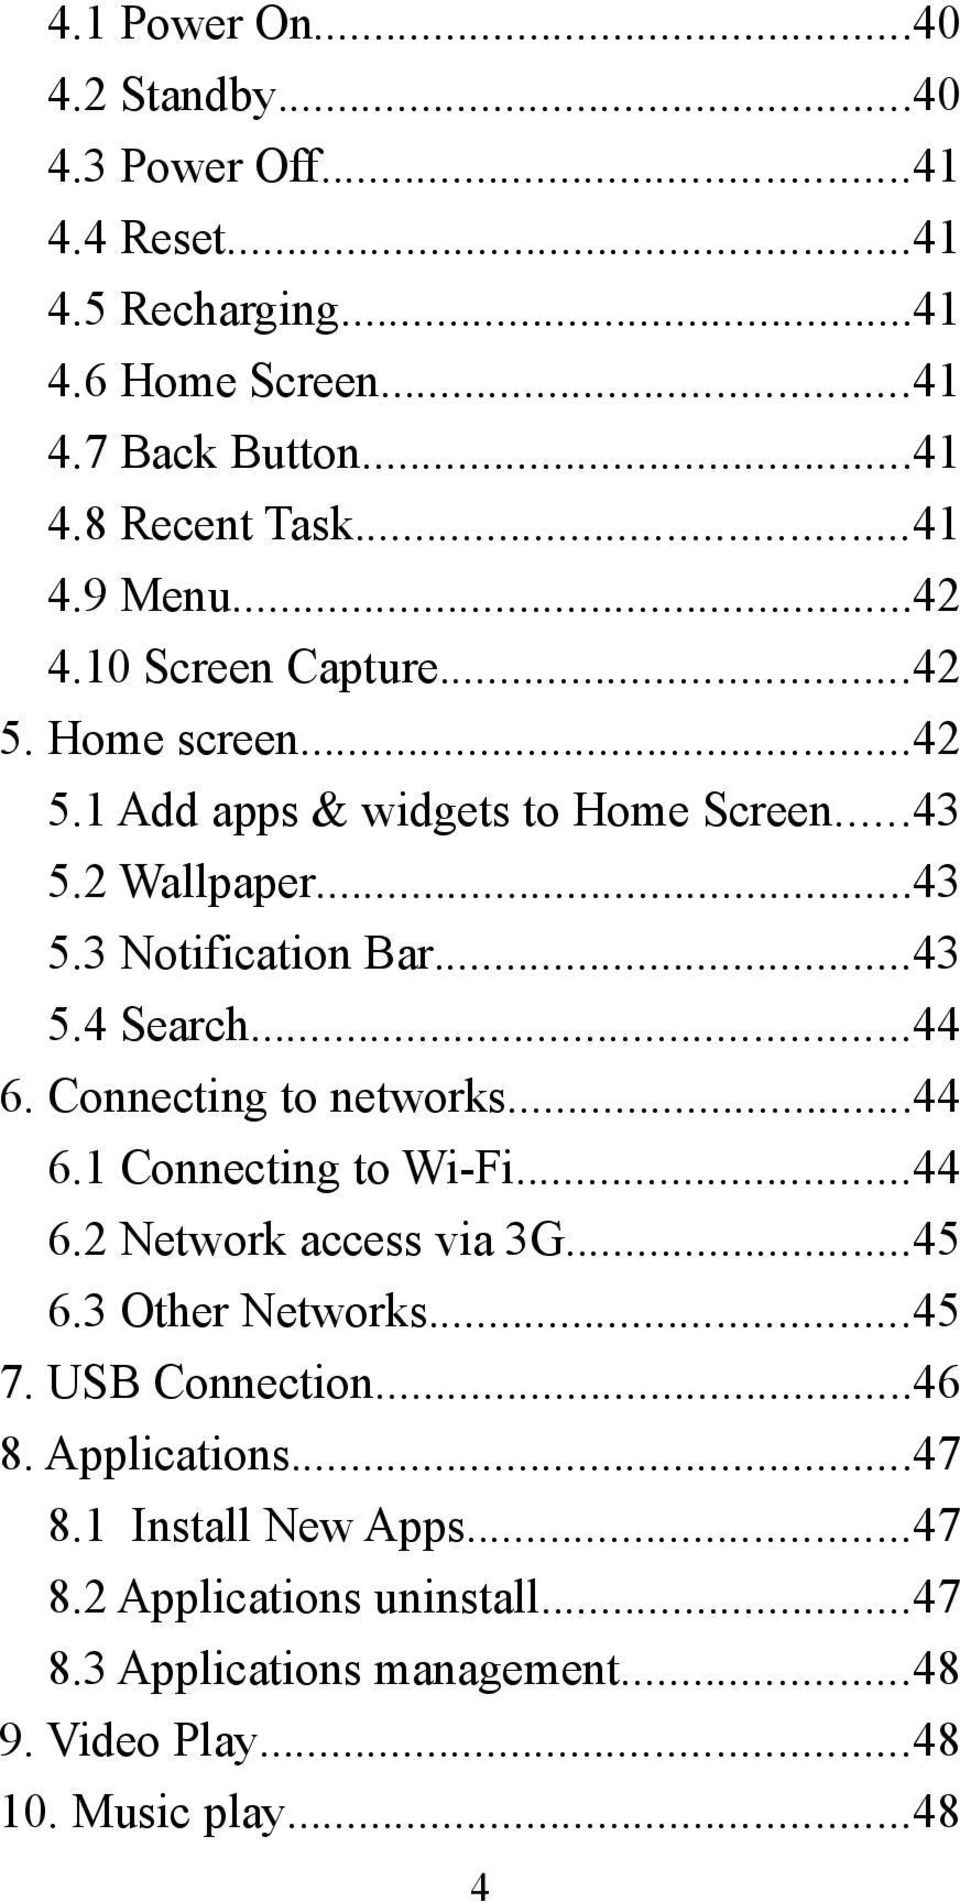 ..44 6. Connecting to networks...44 6.1 Connecting to Wi-Fi...44 6.2 Network access via 3G...45 6.3 Other Networks...45 7. USB Connection...46 8.